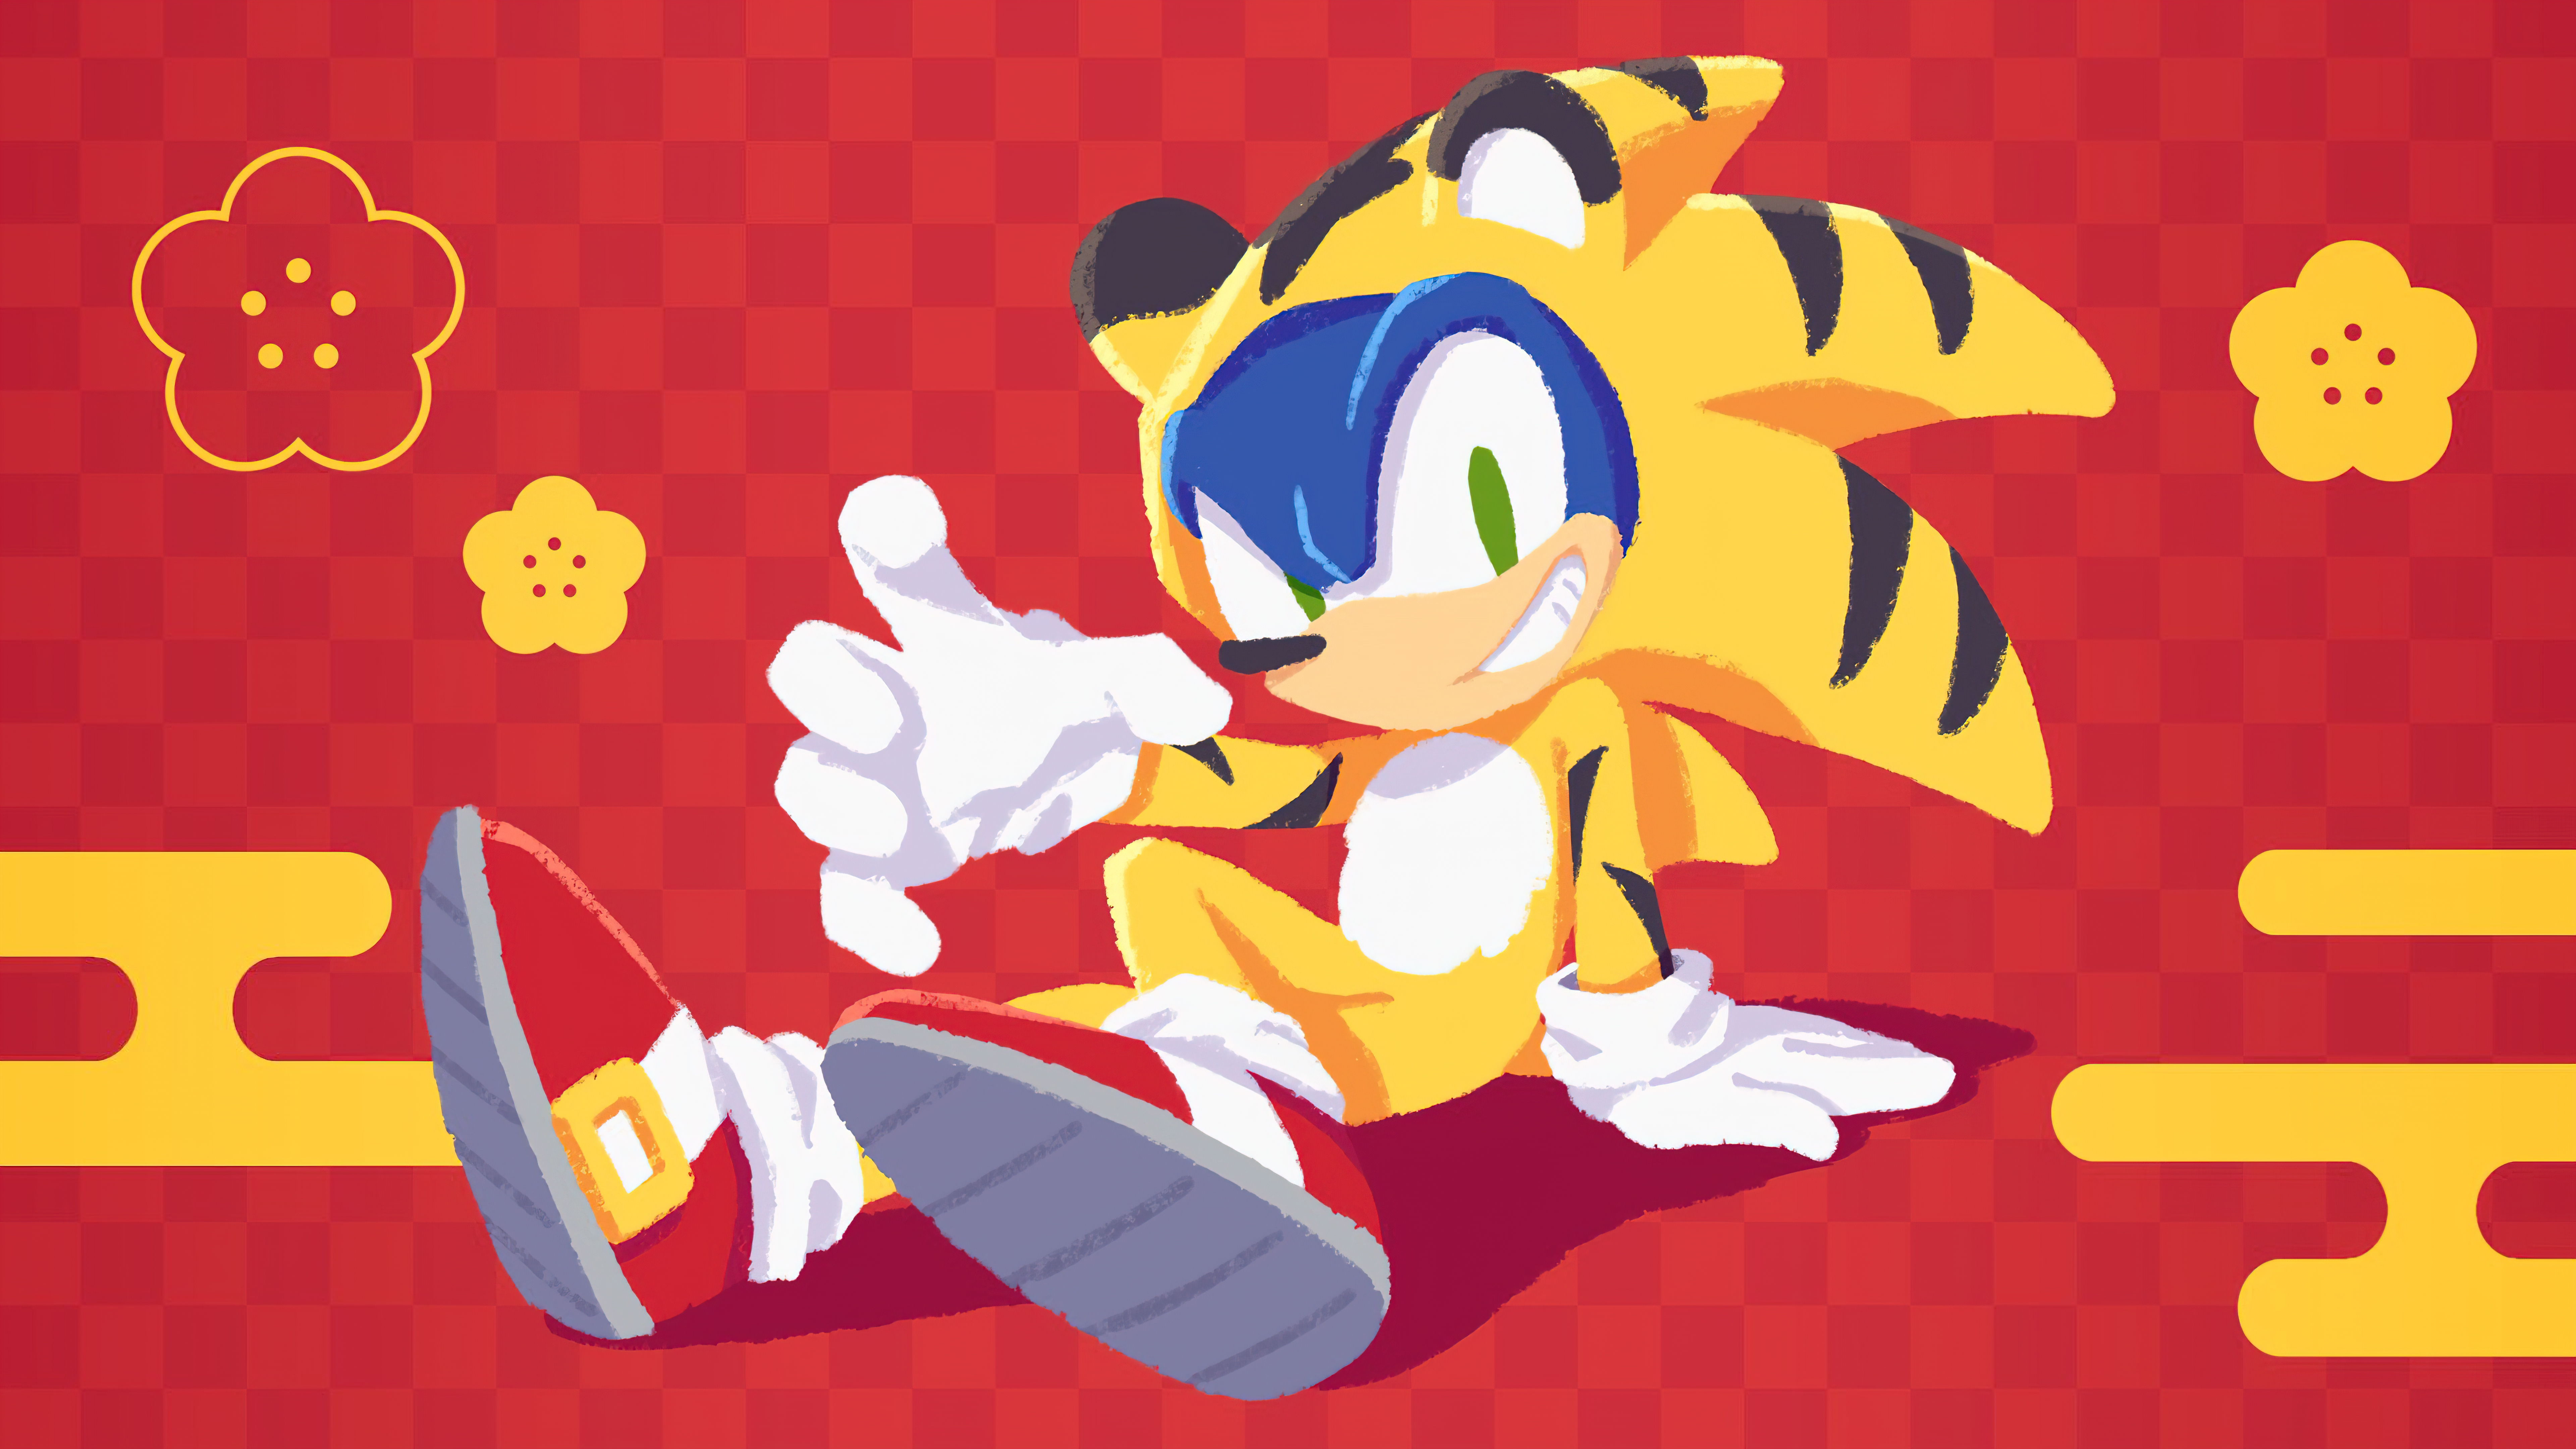 General 7680x4320 comic art Sonic Sonic the Hedgehog tiger Spring Festival Sega PC gaming video game art red red background holiday New Year Yui Karasuno artwork video games